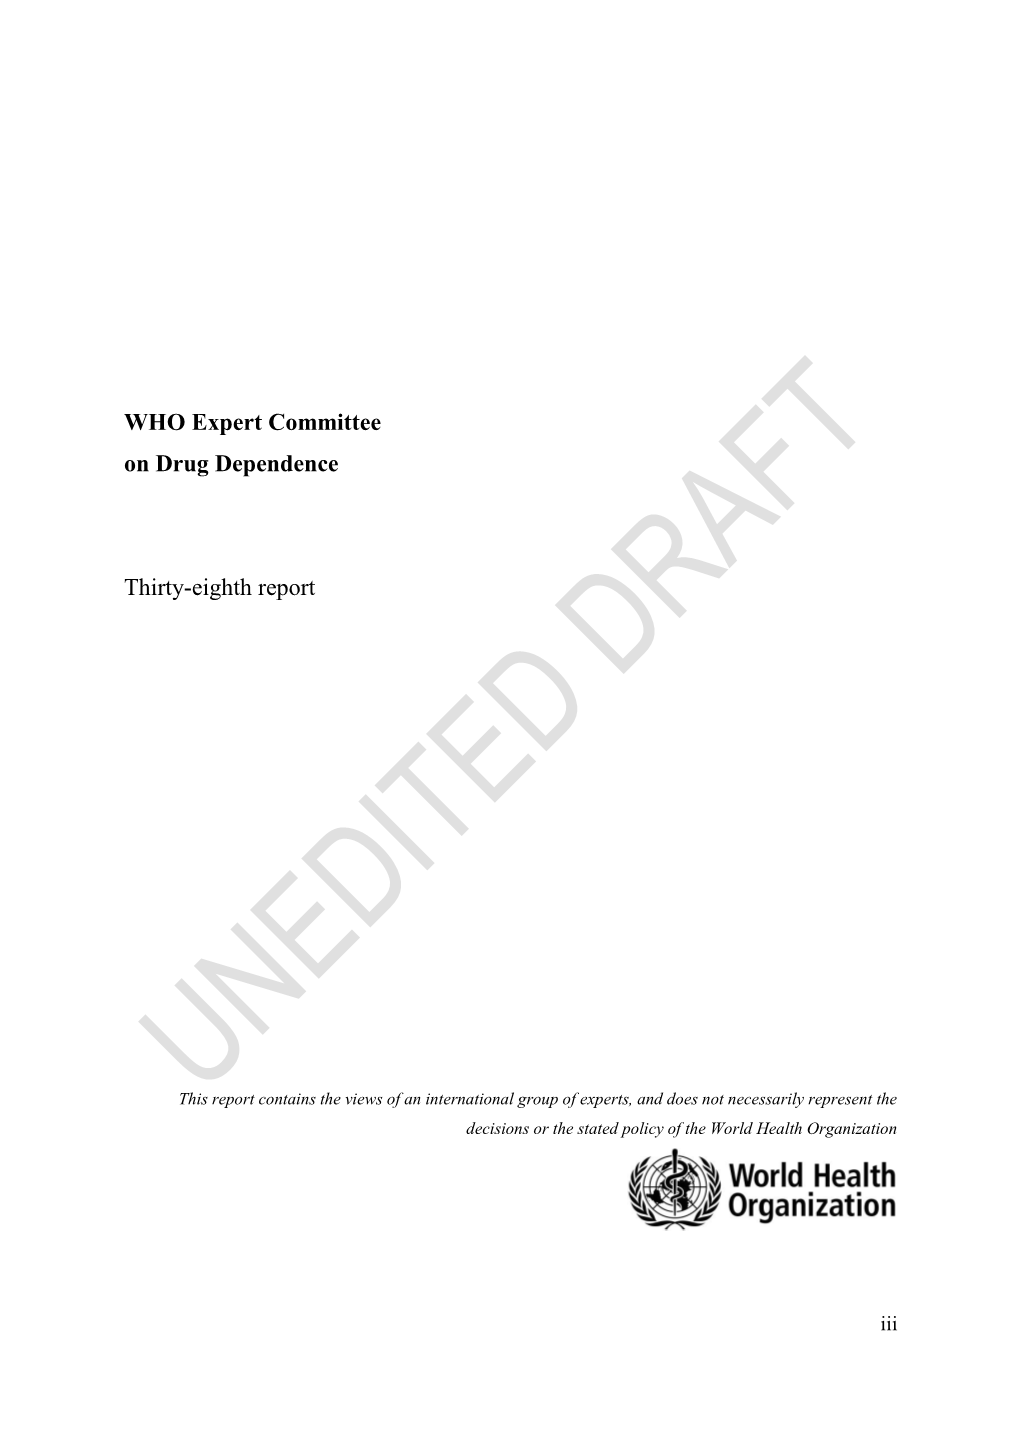 WHO Expert Committee on Drug Dependence Thirty-Eighth Report